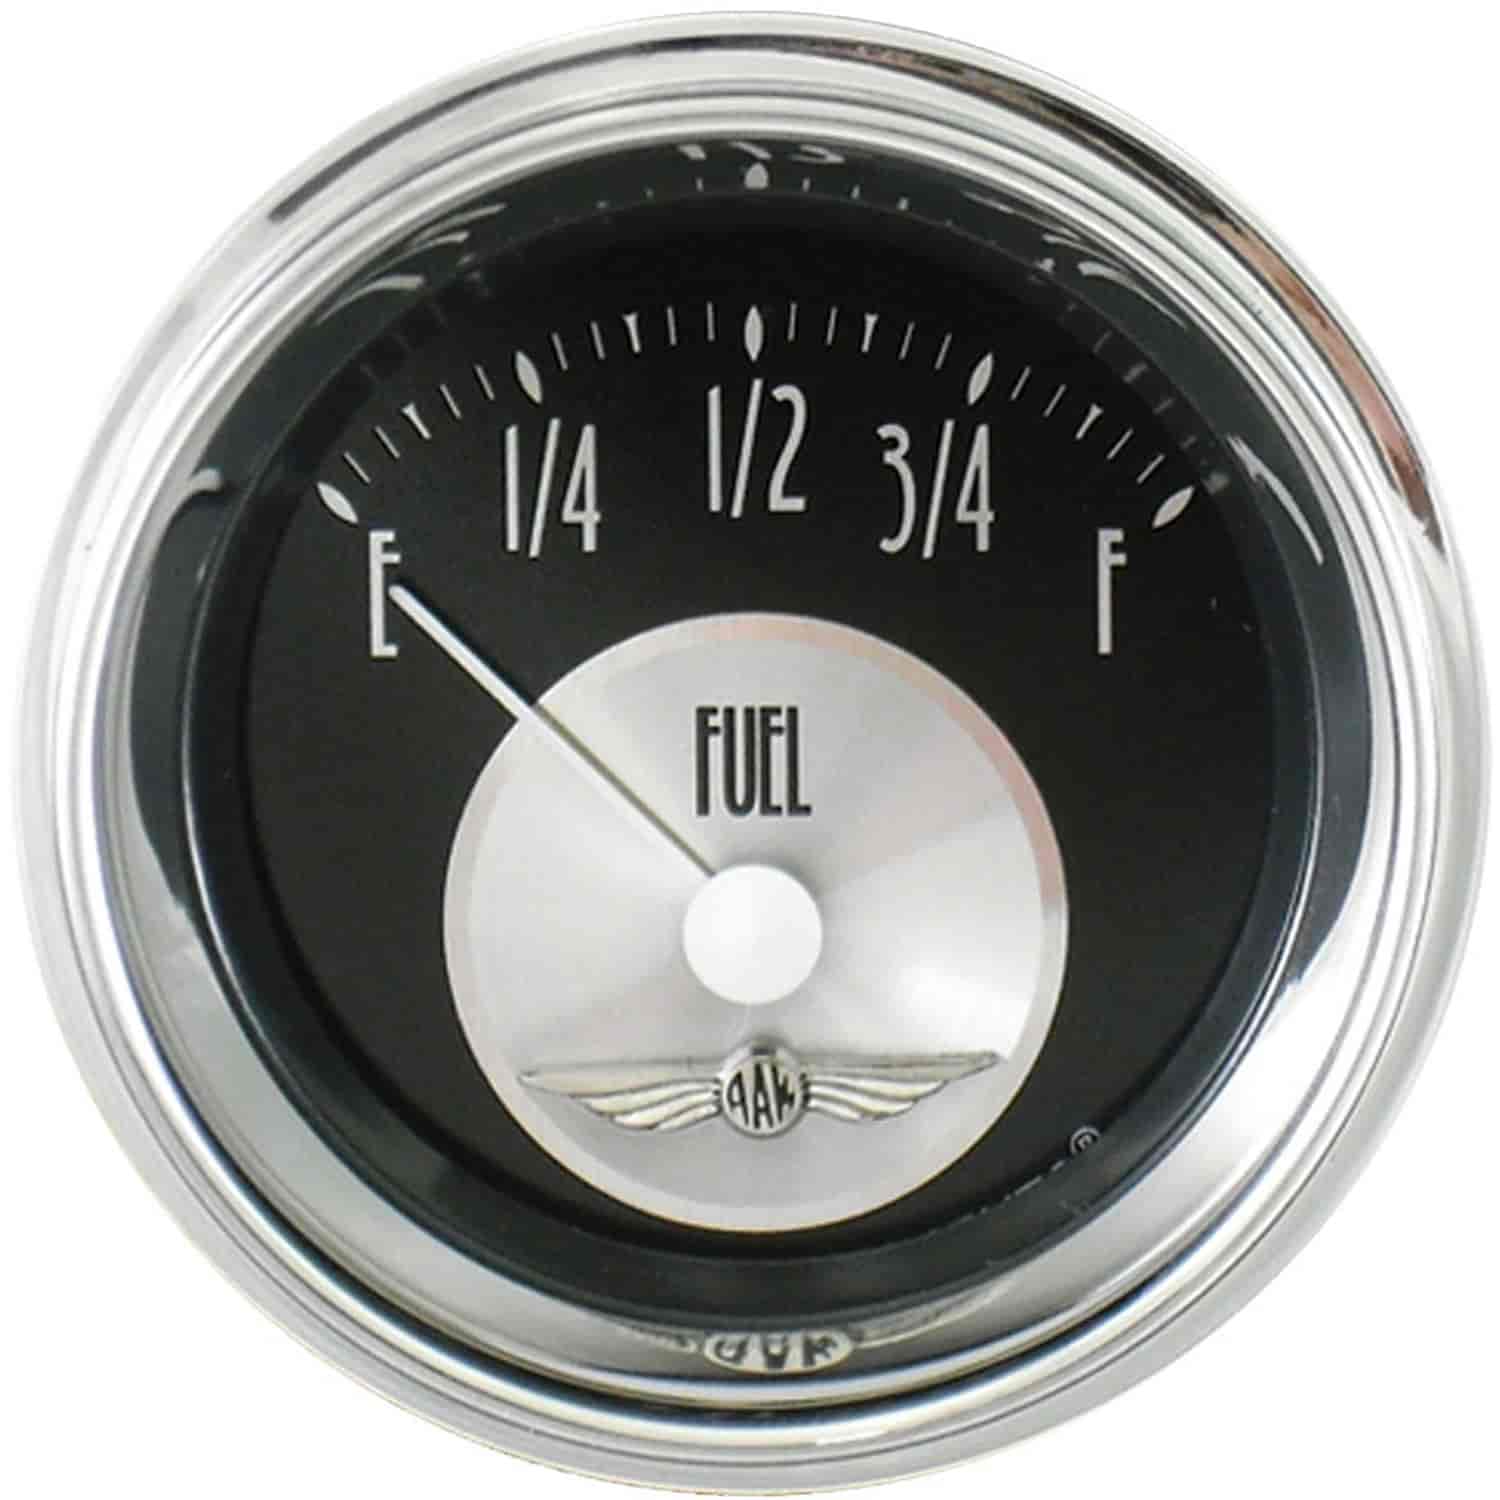 All American Tradition Fuel Gauge 2-1/8" Electrical